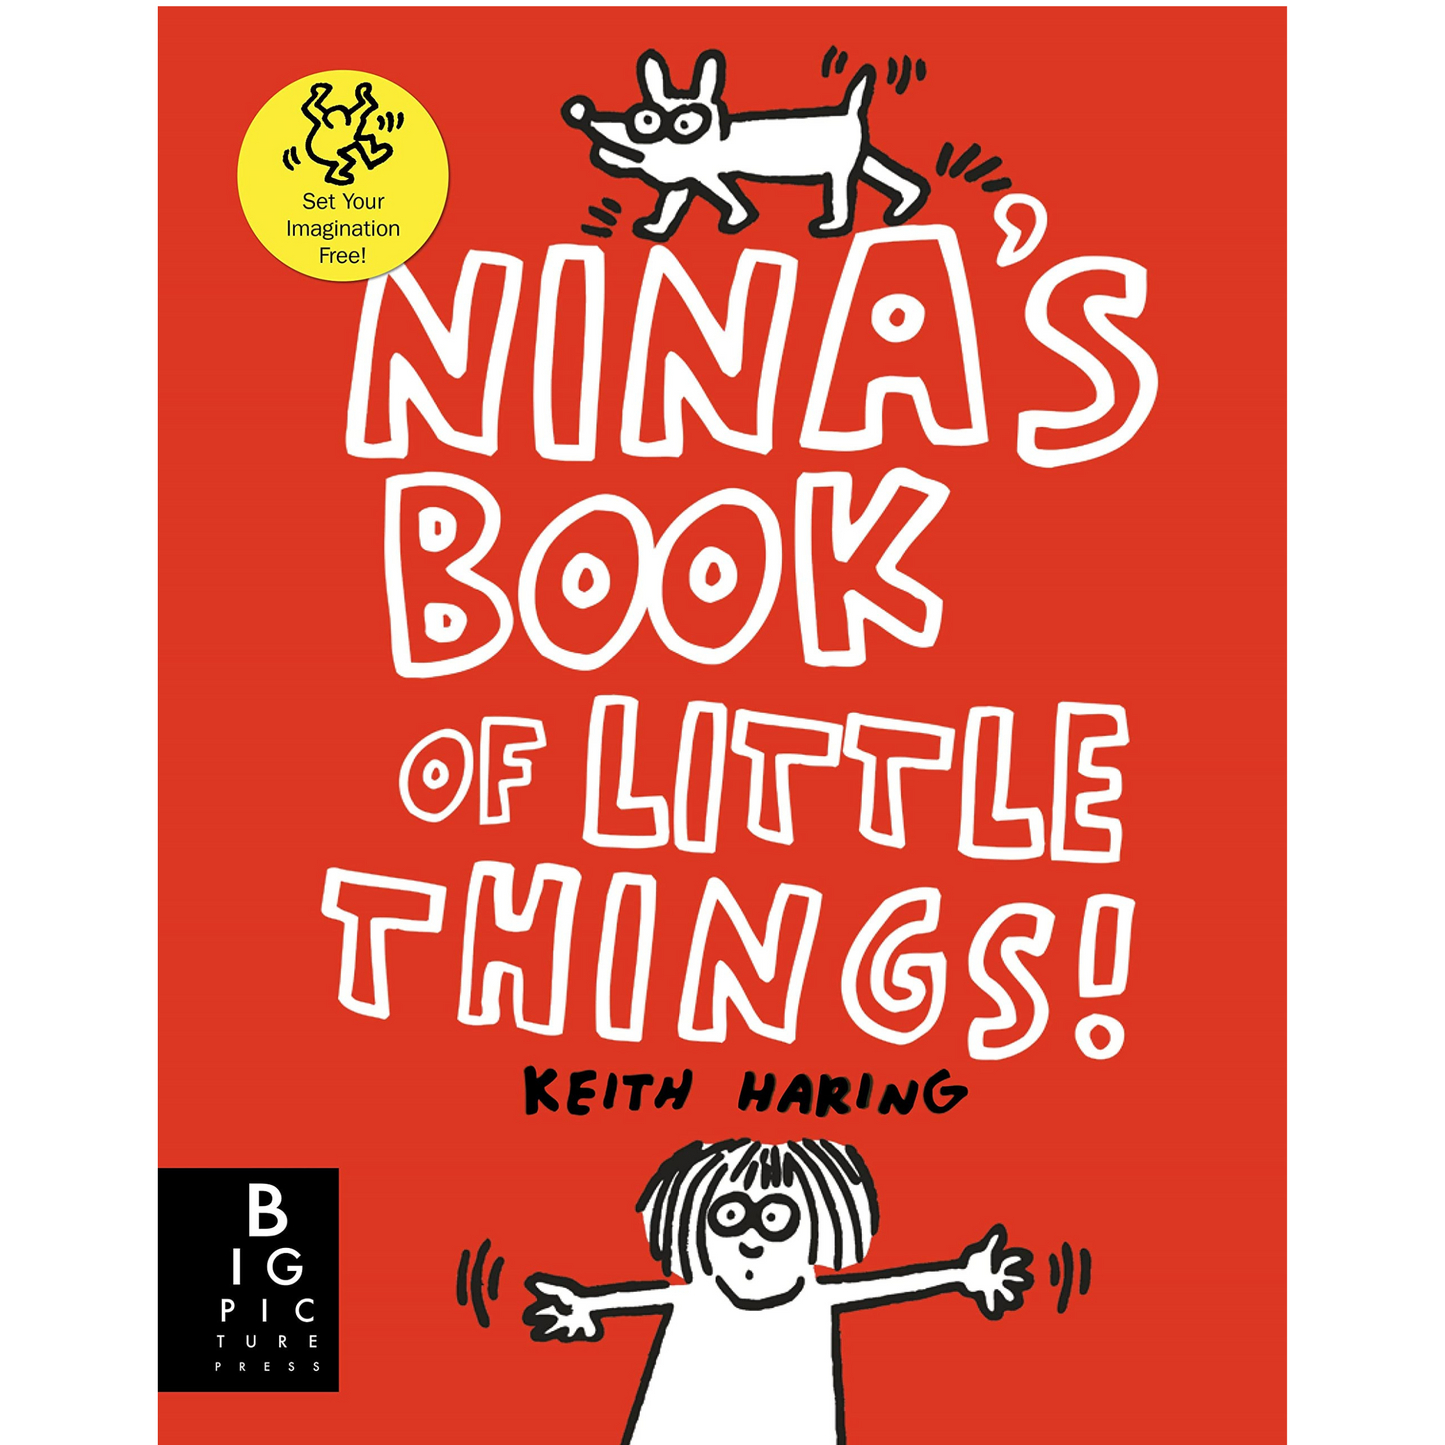 Nina's Book of Little Things: by Keith Haring front cover.